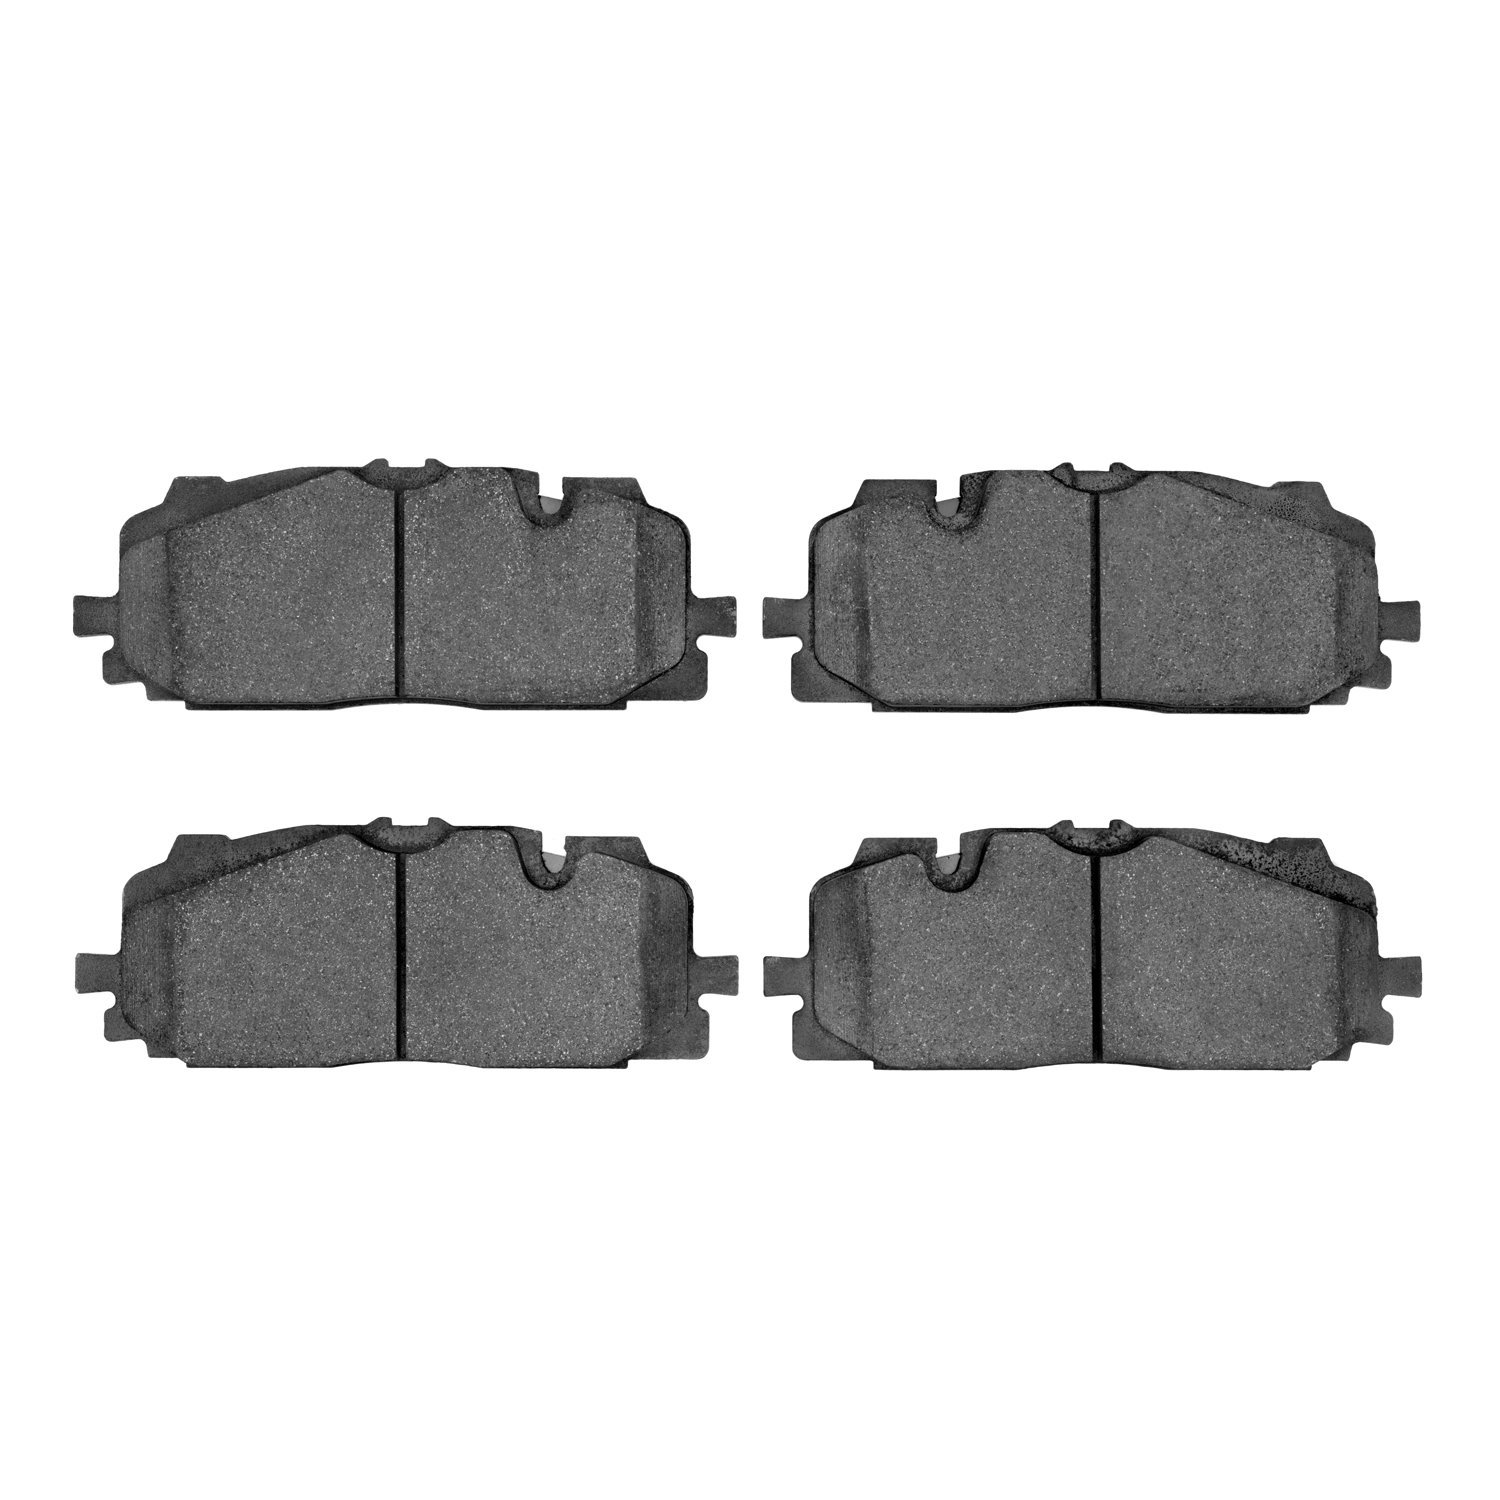 1552-1894-00 5000 Advanced Low-Metallic Brake Pads, Fits Select Audi/Volkswagen, Position: Front